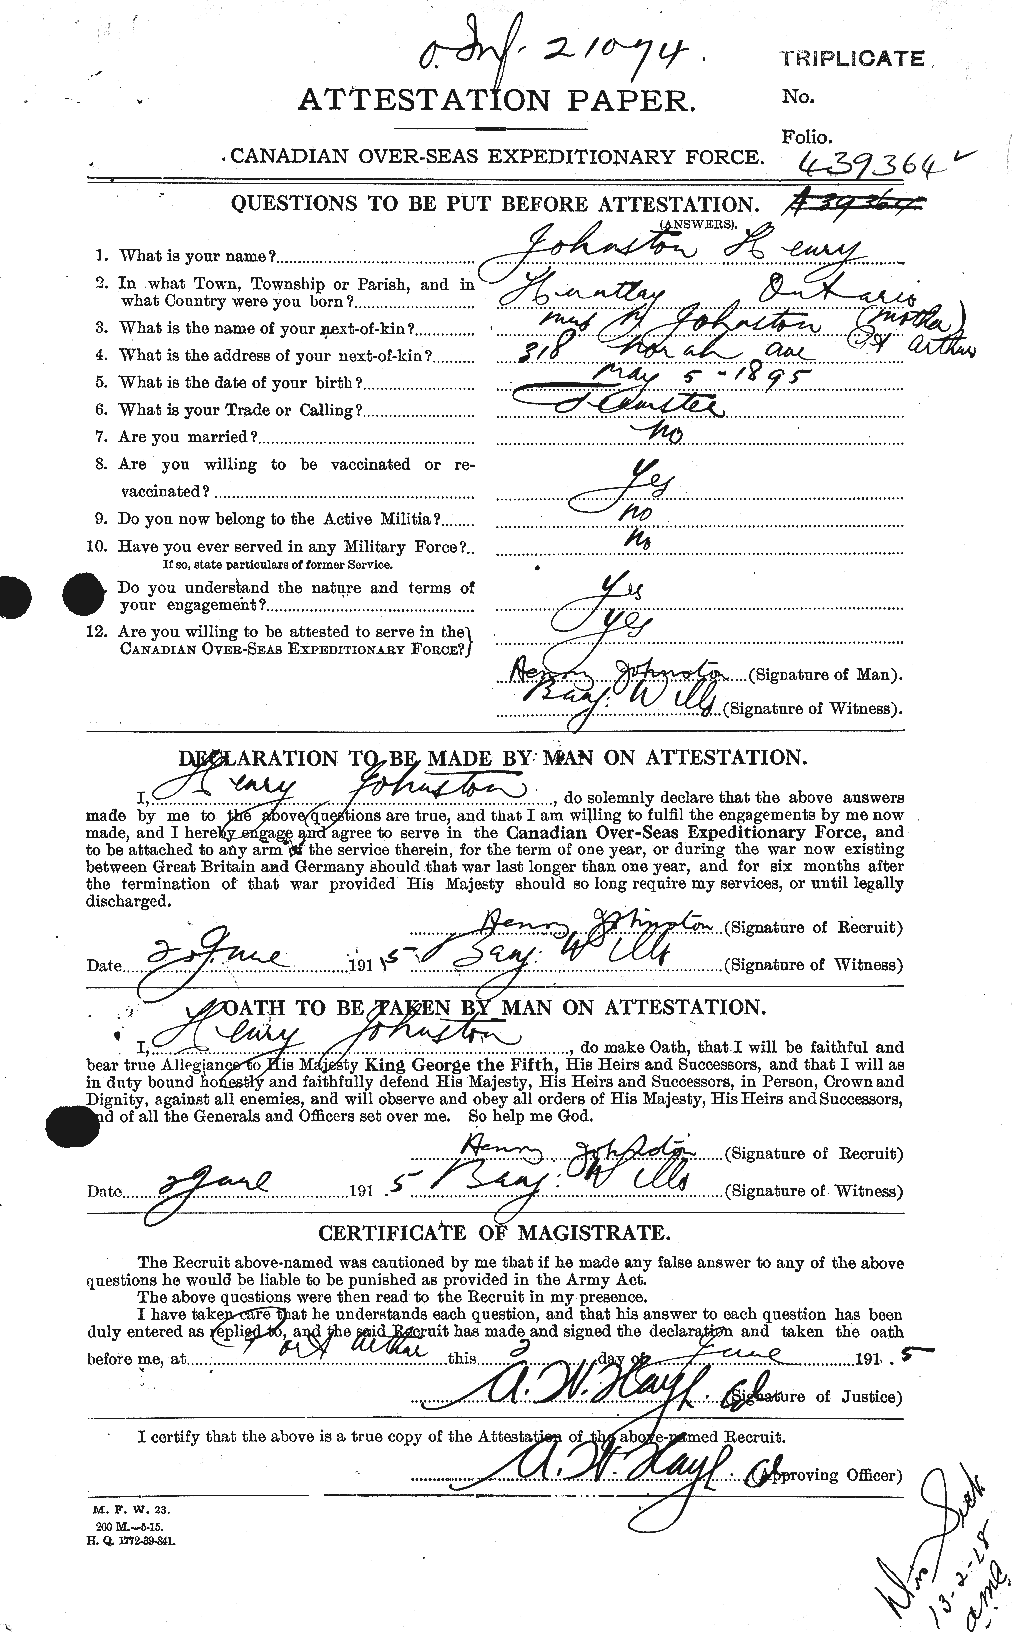 Personnel Records of the First World War - CEF 419537a